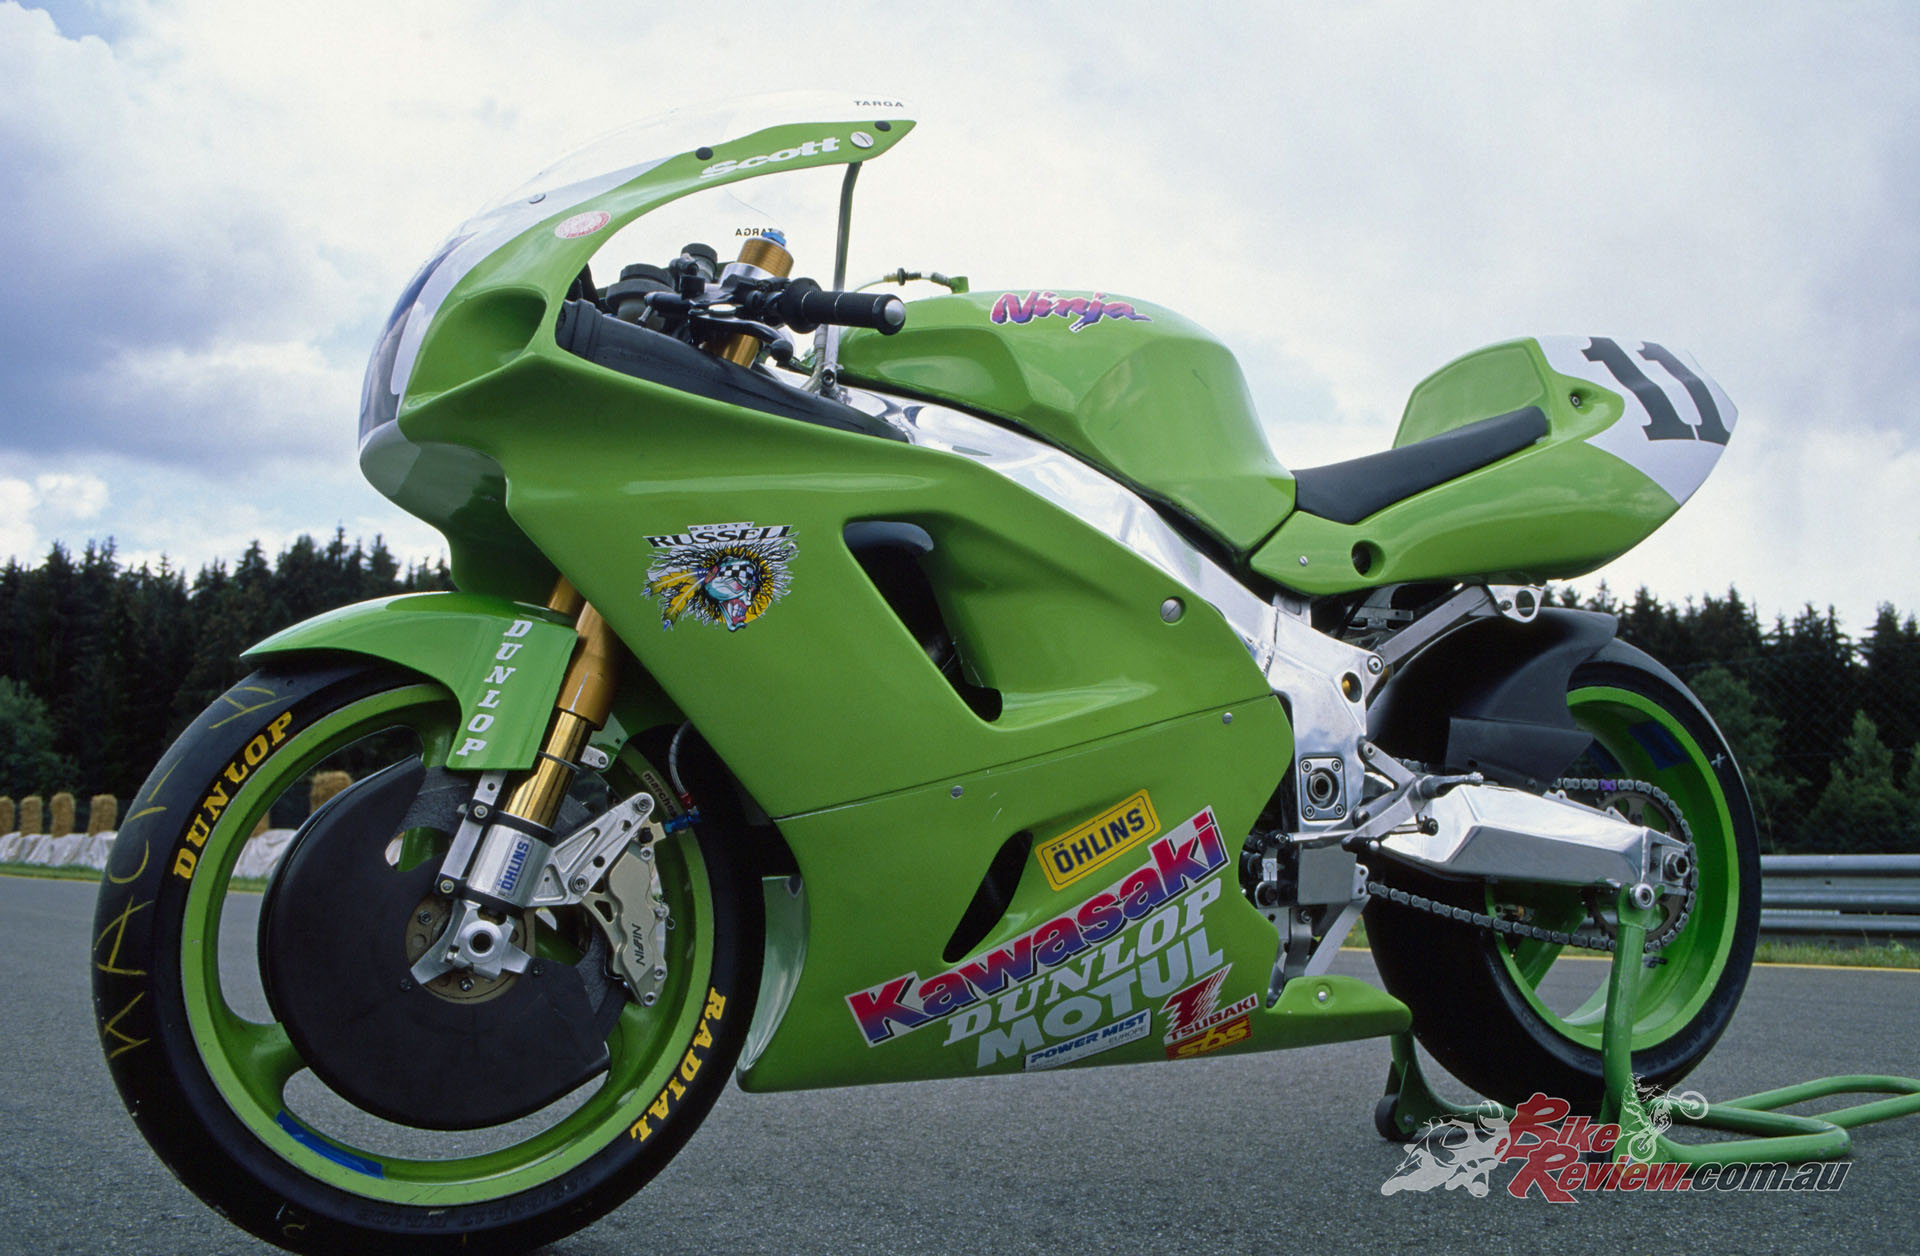 "A multi-adjustable streetbike chassis was an inevitable spinoff from Superbike racing, but in fact while the team did experiment a little with the adjustable swingarm pivot, Doyle admitted they usually came back to the original settings."